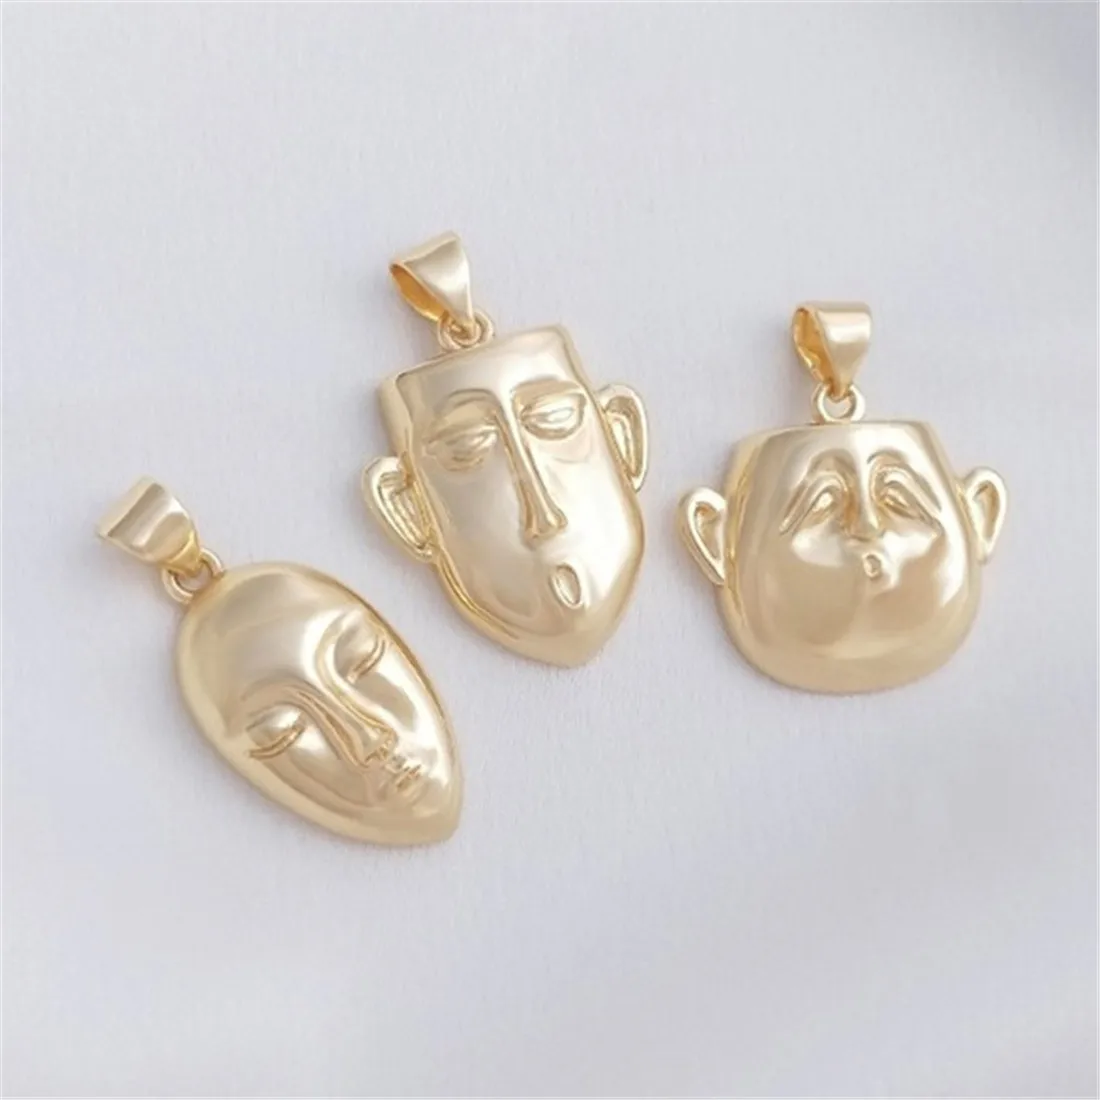 14K Gold Mask Pendant, Facial Expression, Avatar Pendant, Handmade DIY Necklace, Sweater Chain, Jewelry Pendant D033